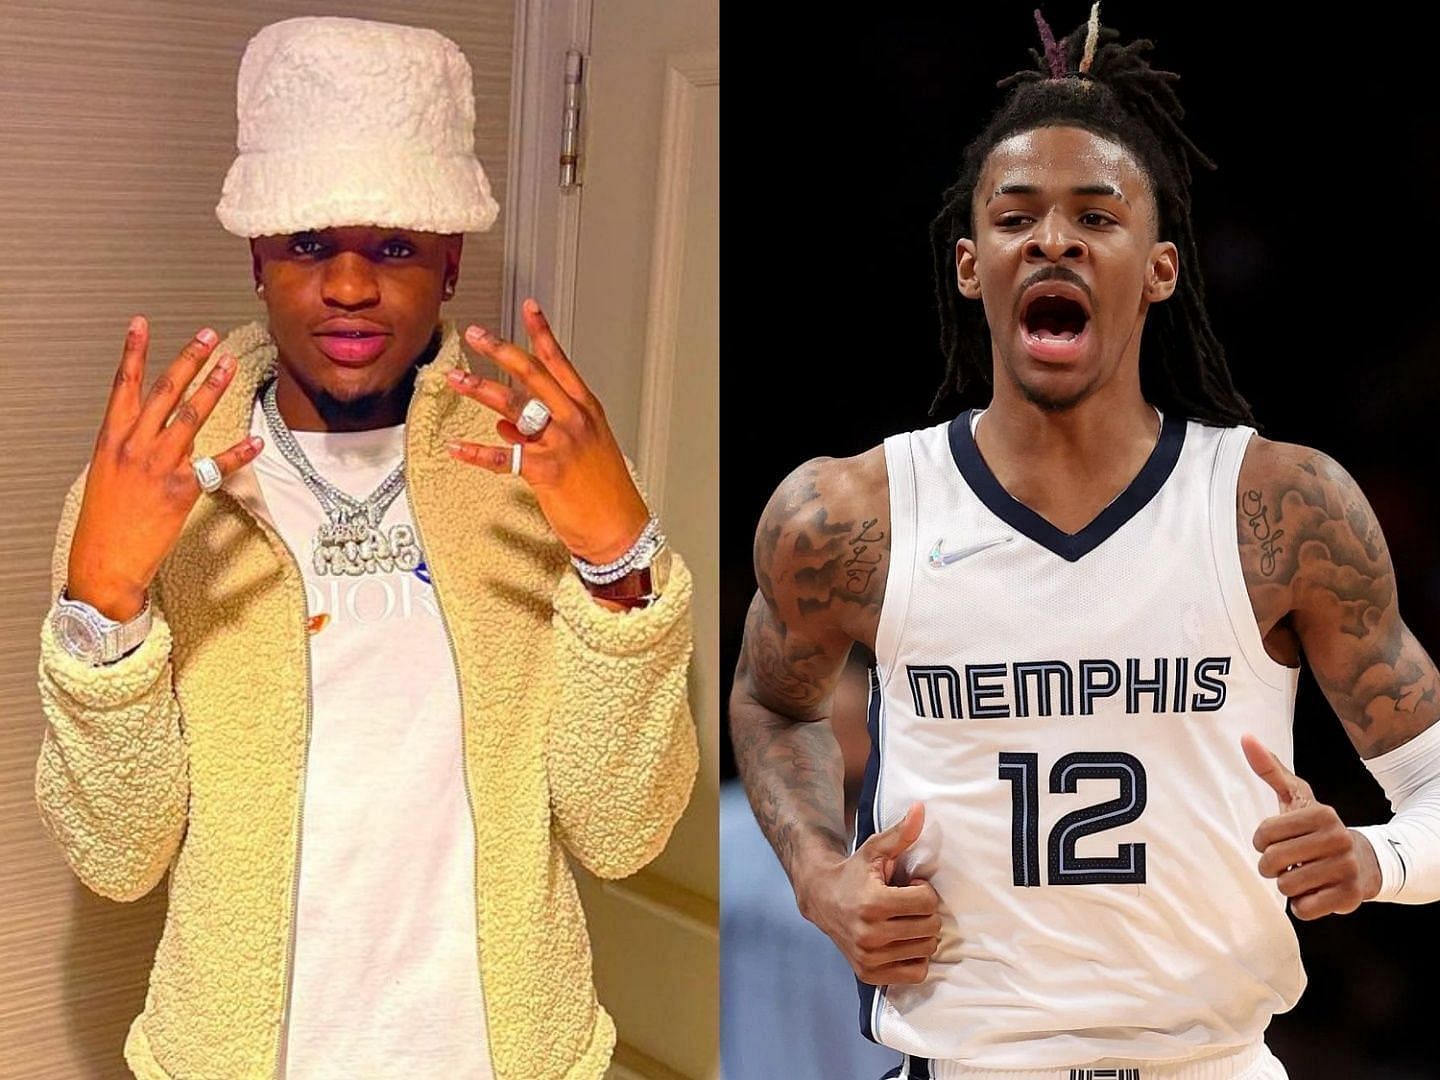 Davonte Pack, also known as DTap, and Ja Morant of the Memphis Grizzlies